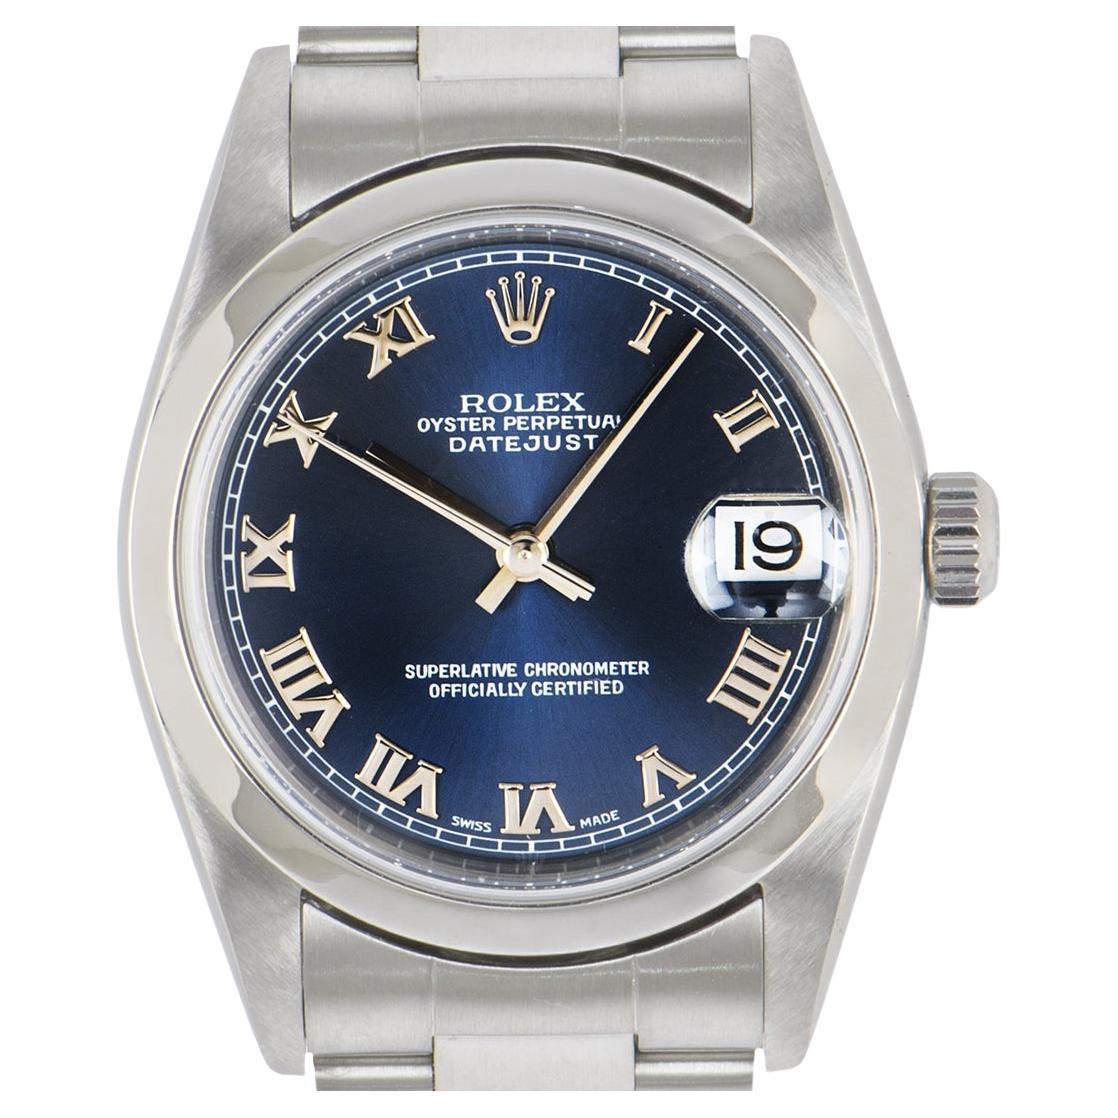 A ladies Datejust wristwatch in stainless steel by Rolex, features a blue dial with roman numerals and a smooth bezel. The watch is equipped with an oyster bracelet and deployant clasp. It is also fitted with sapphire crystal and automatic